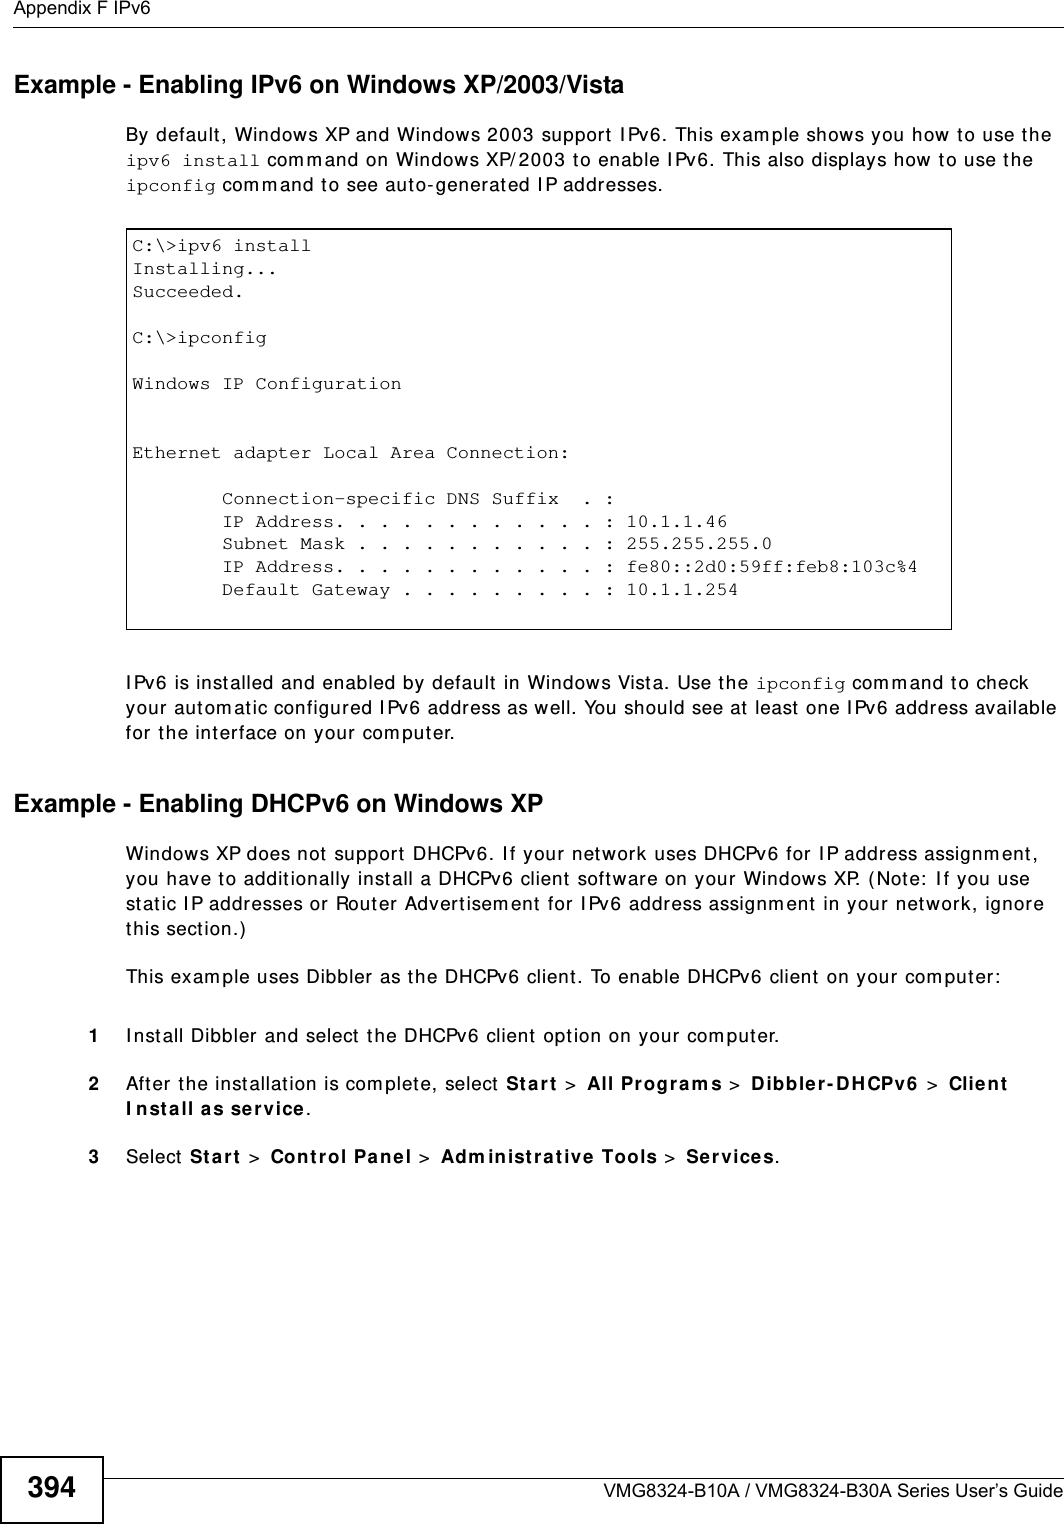 Appendix F IPv6VMG8324-B10A / VMG8324-B30A Series User’s Guide394Example - Enabling IPv6 on Windows XP/2003/VistaBy default , Windows XP and Windows 2003 support  I Pv6. This exam ple shows you how  t o use the ipv6 install com m and on Windows XP/ 2003 t o enable I Pv6. This also displays how  t o use the ipconfig com m and to see aut o-generated I P addresses.I Pv6 is inst alled and enabled by default  in Windows Vista. Use the ipconfig com m and t o check your autom at ic configured I Pv6 address as well. You should see at  least one I Pv6 address available for t he interface on your com puter.Example - Enabling DHCPv6 on Windows XPWindows XP does not support  DHCPv6. I f your net work uses DHCPv6 for I P address assignm ent , you have to addit ionally inst all a DHCPv6 client software on your Windows XP. (Note:  I f you use st atic I P addresses or Router Advertisem ent  for I Pv6 address assignm ent  in your net work, ignore this sect ion.)This exam ple uses Dibbler as the DHCPv6 client. To enable DHCPv6 client on your com puter:1I nst all Dibbler and select the DHCPv6 client opt ion on your com put er.2After the installat ion is com plete, select  St a r t  &gt;  All Program s &gt;  D ibbler - DHCPv6  &gt;  Clien t I nsta ll as se rvice.3Select St a r t  &gt;  Cont rol Pan e l &gt;  Adm in istr at ive Tools &gt;  Se rvices.C:\&gt;ipv6 installInstalling...Succeeded.C:\&gt;ipconfigWindows IP ConfigurationEthernet adapter Local Area Connection:        Connection-specific DNS Suffix  . :         IP Address. . . . . . . . . . . . : 10.1.1.46        Subnet Mask . . . . . . . . . . . : 255.255.255.0        IP Address. . . . . . . . . . . . : fe80::2d0:59ff:feb8:103c%4        Default Gateway . . . . . . . . . : 10.1.1.254